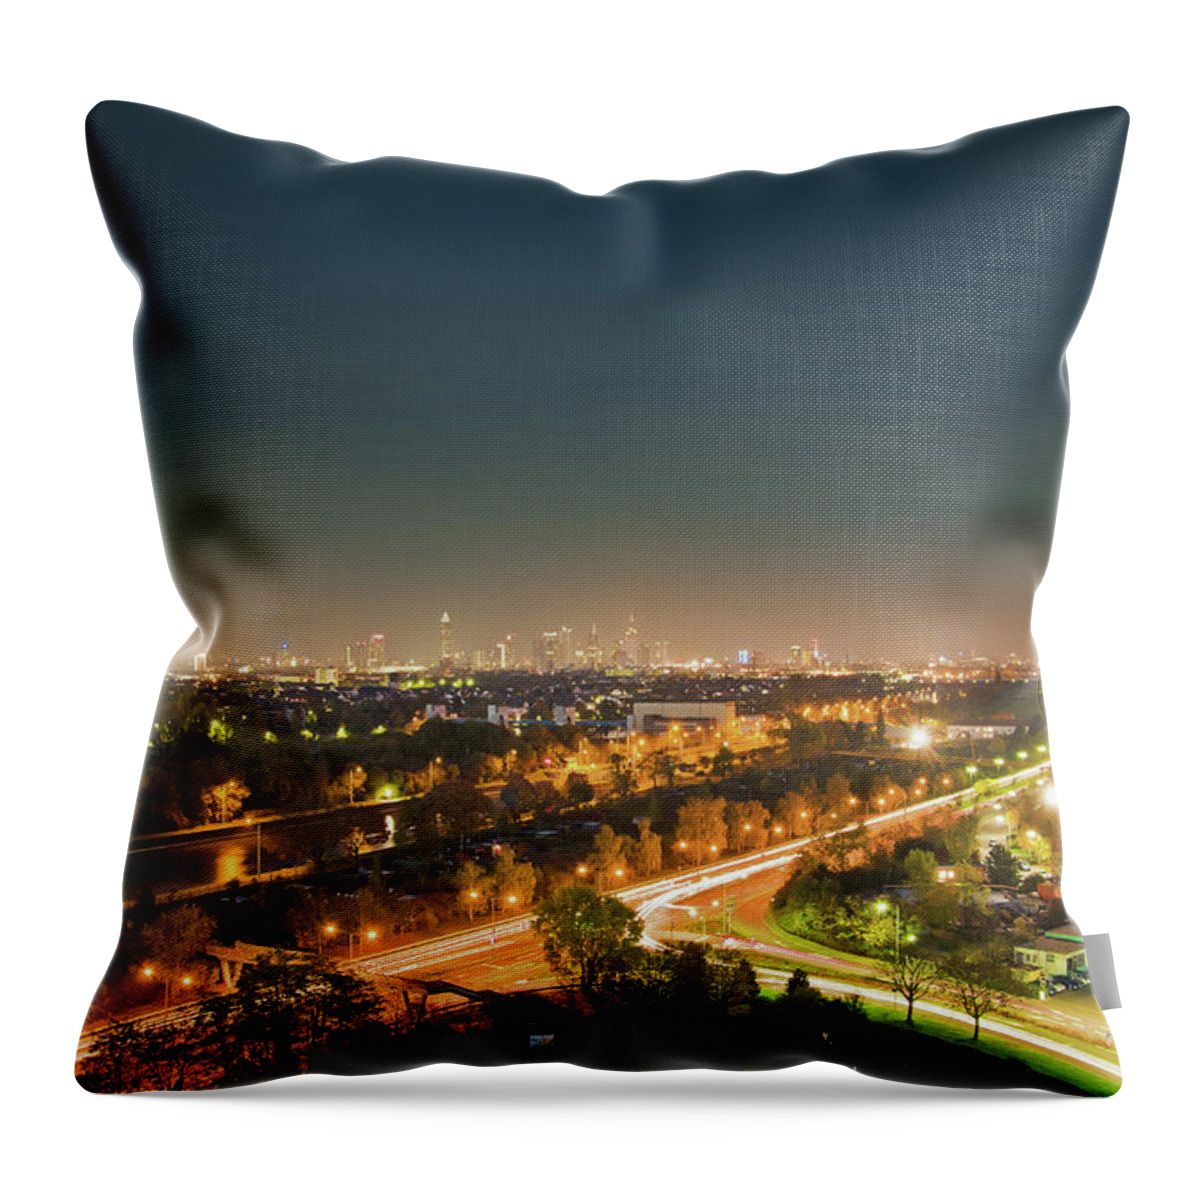 Blurred Motion Throw Pillow featuring the photograph Aerial View Of Streetlights In City by Manuel Sulzer